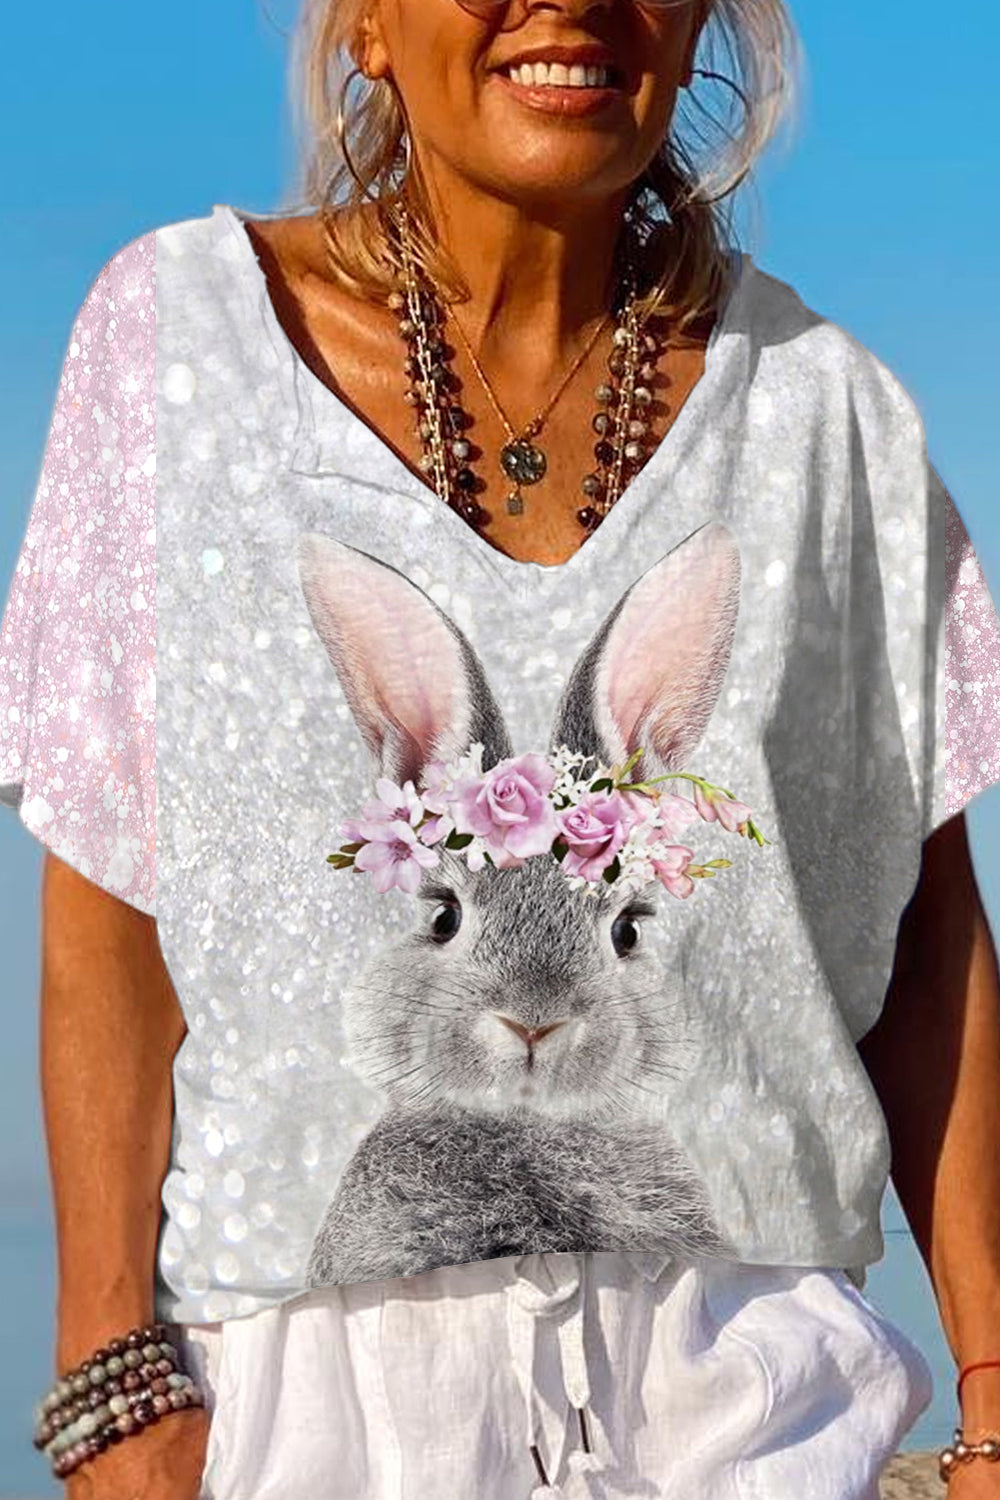 Glitter Cute Easter Bunny With Pink Wreath Printed Casual Dolman Sleeves Tee